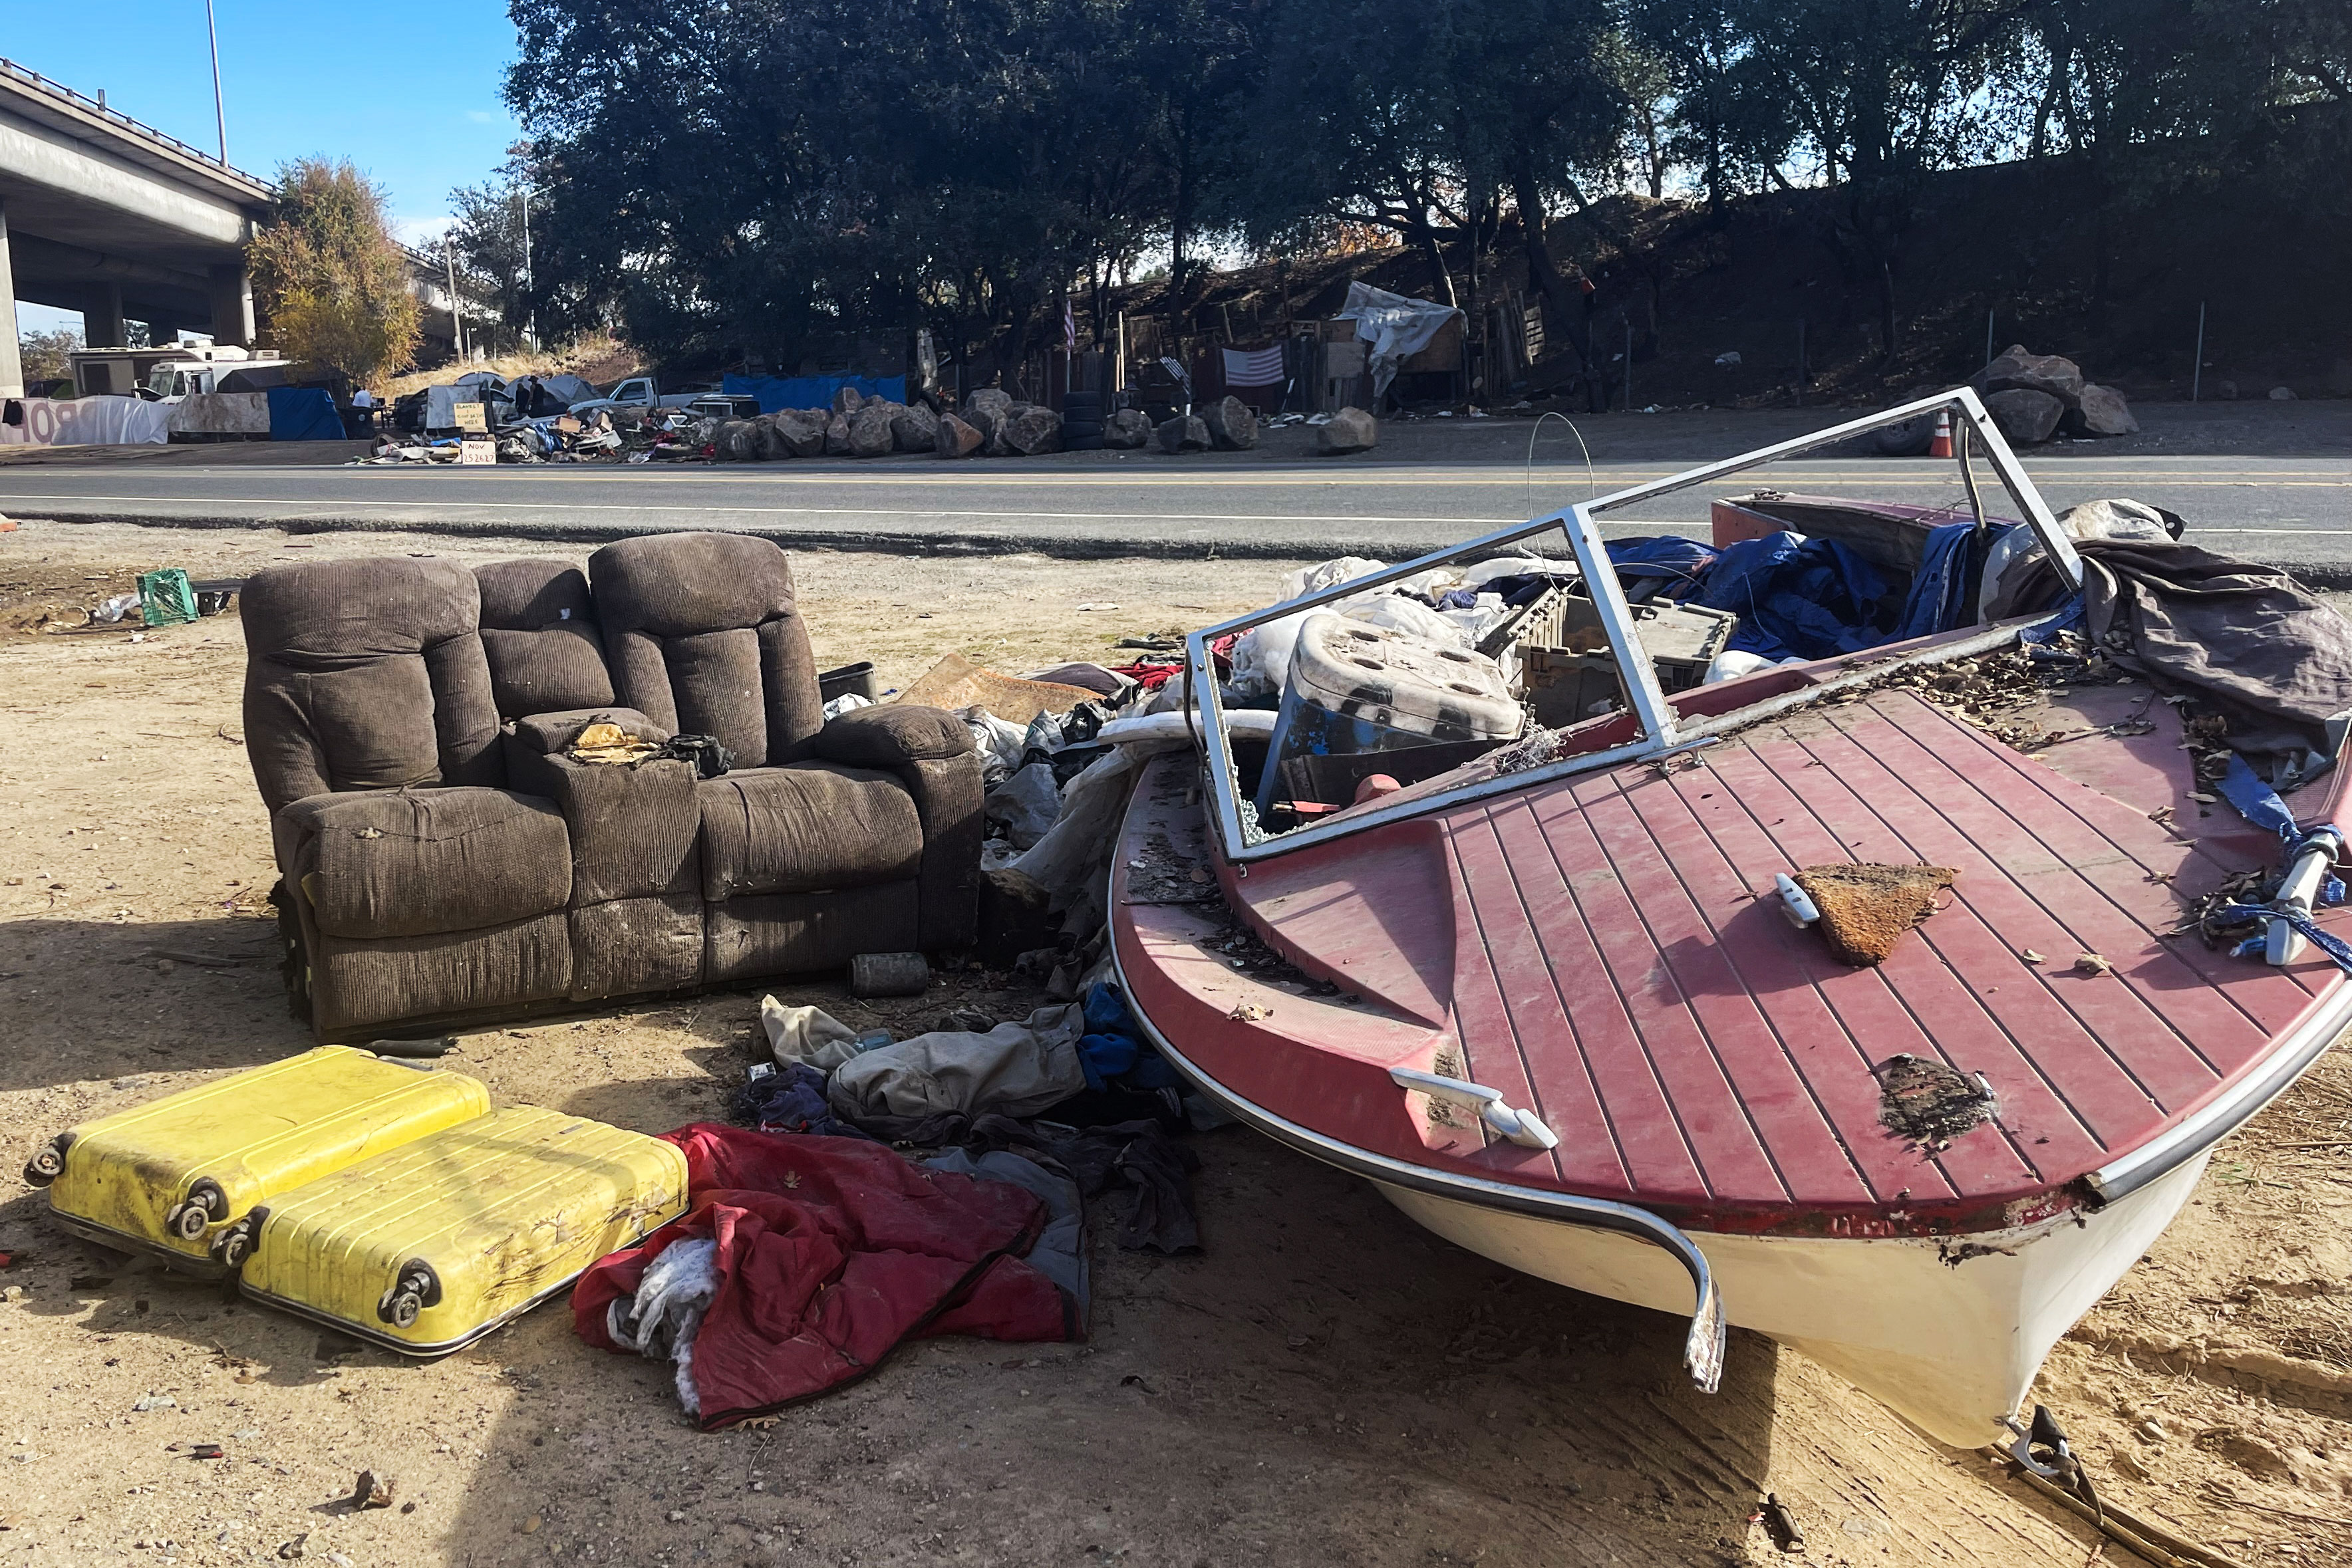 A photo shows a homeless encampment on the side of a road. A couch and boat are on the side of the road and filled with discarded items.